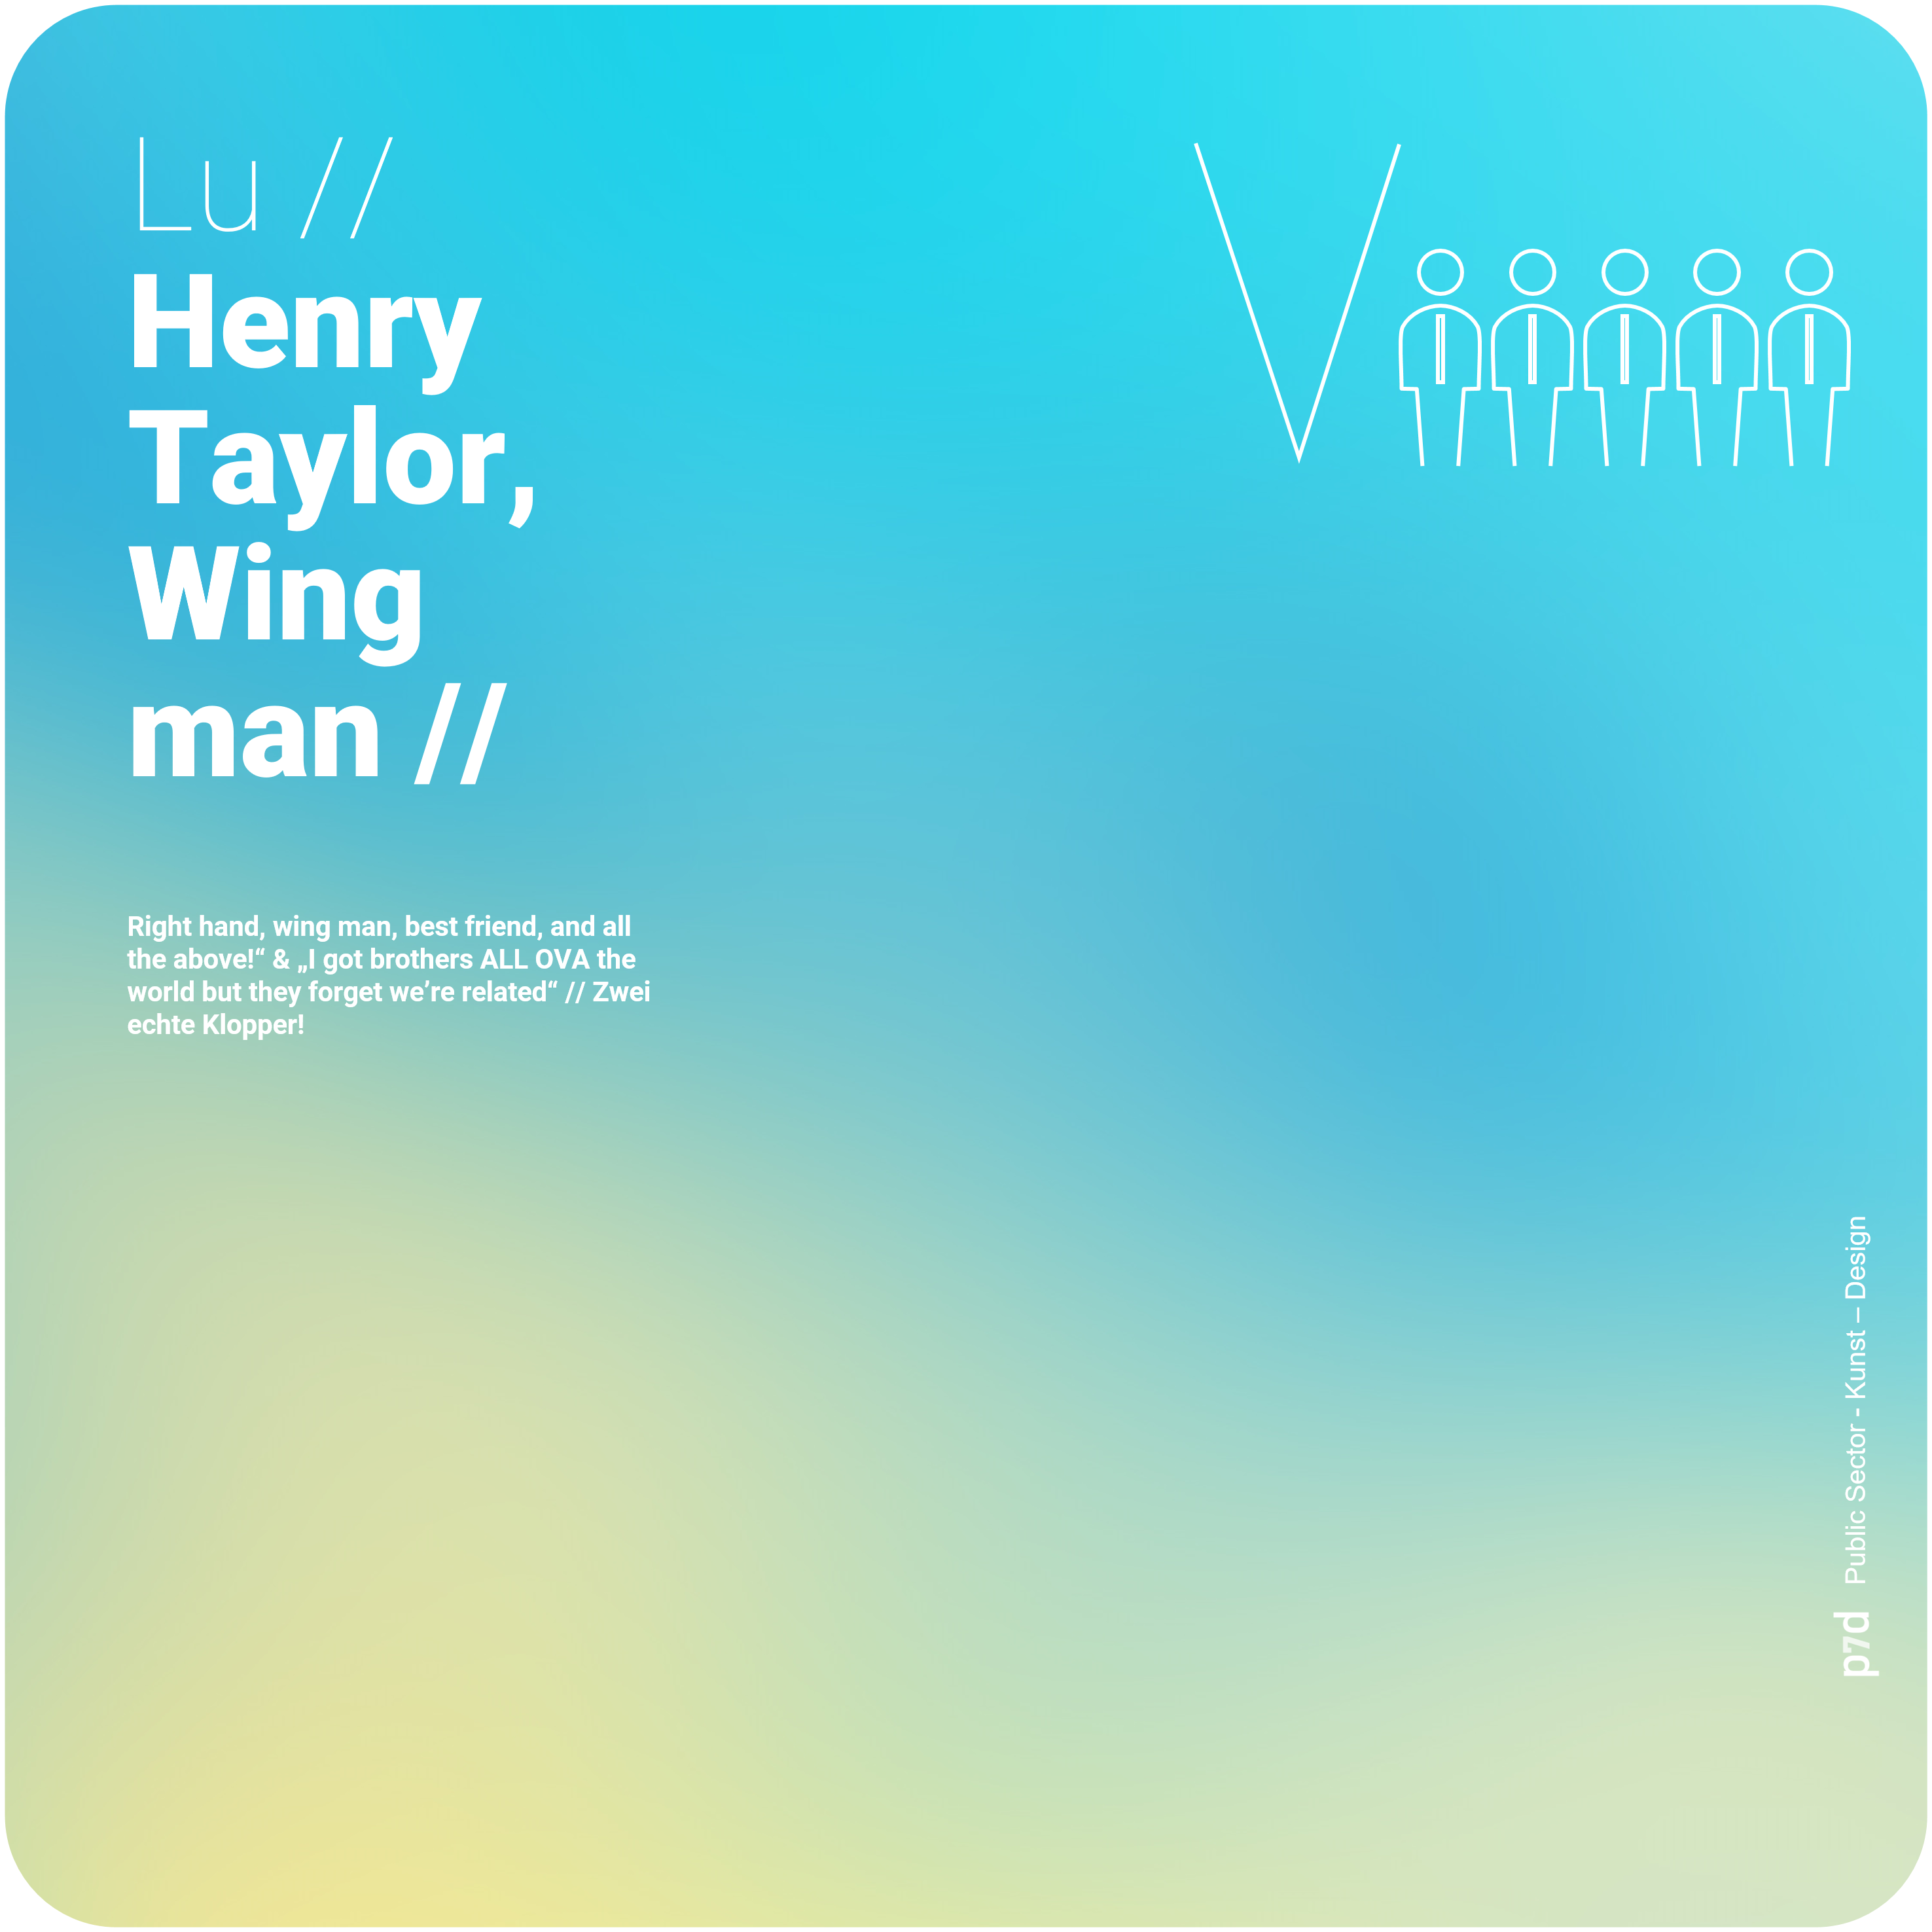 Lu // Henry Taylor: „Right hand, wing man, best friend, and all the above!“ &  „I got brothers ALL OVA the world but they forget we’re related“ / Zwei echte Klopper!